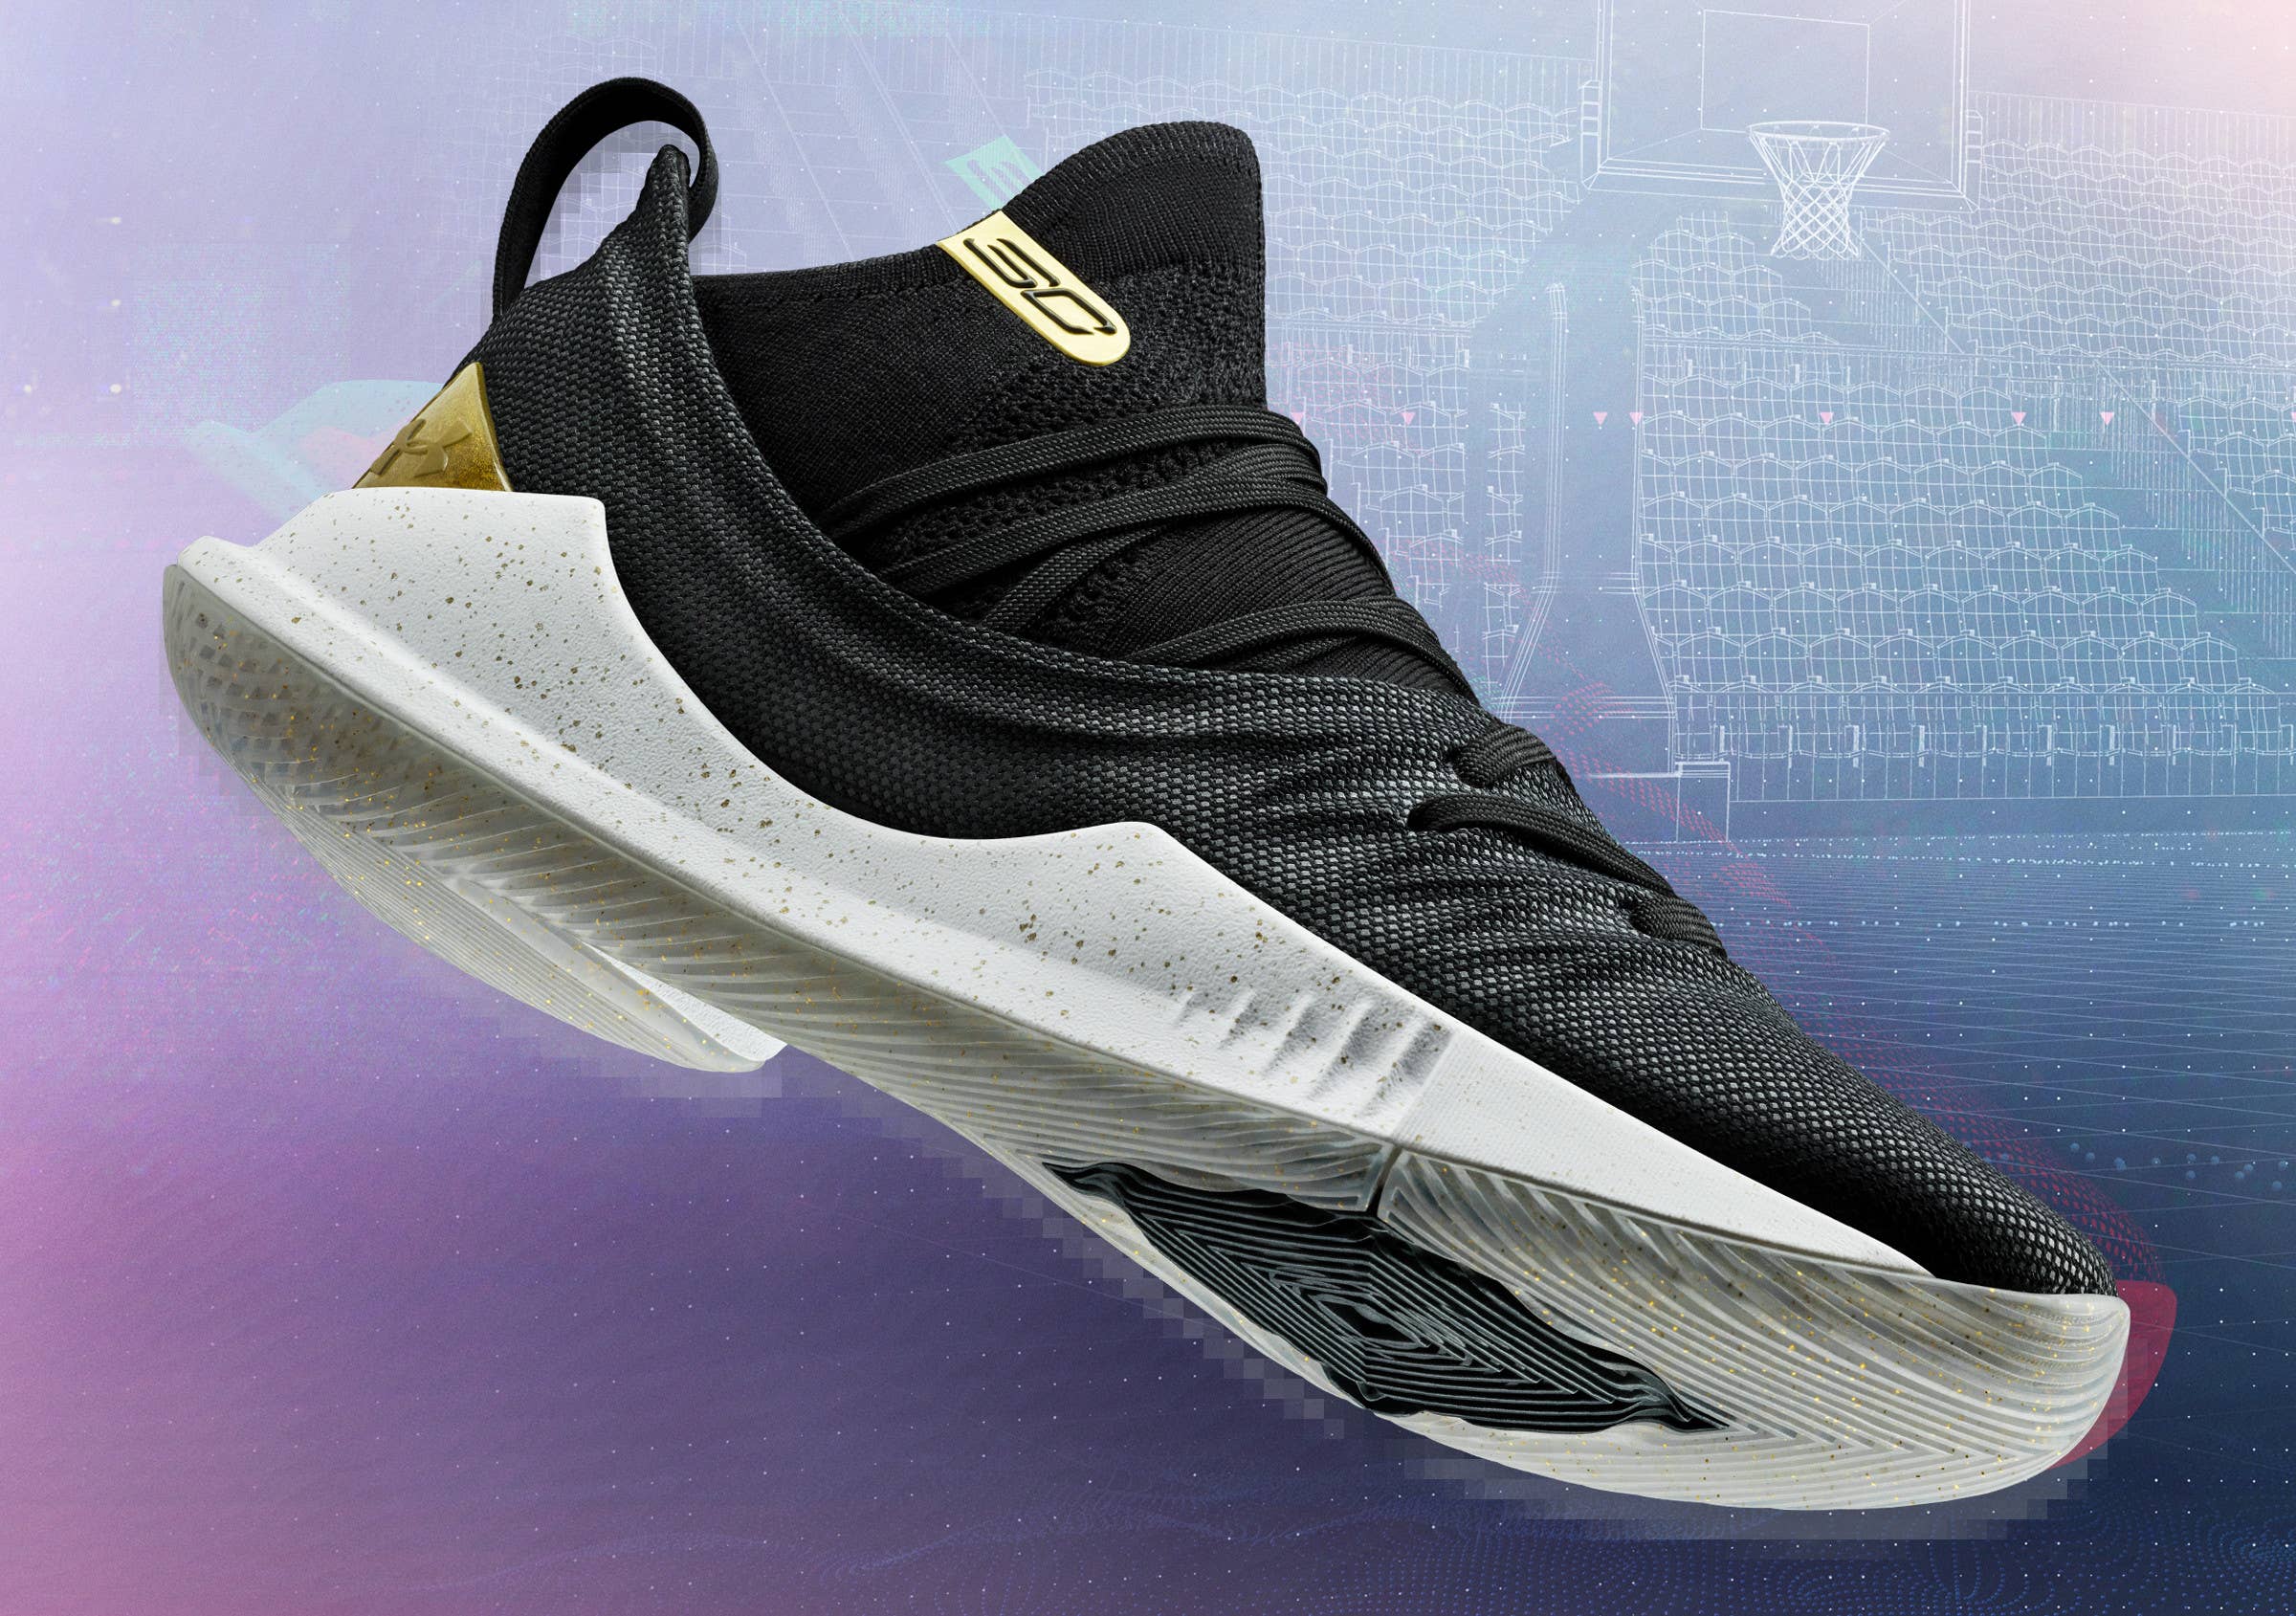 Карри 5. Under Armour Curry 5. Under Armour Curry. Under Armour Curry 11. Under Armour Curry 5 подошва.